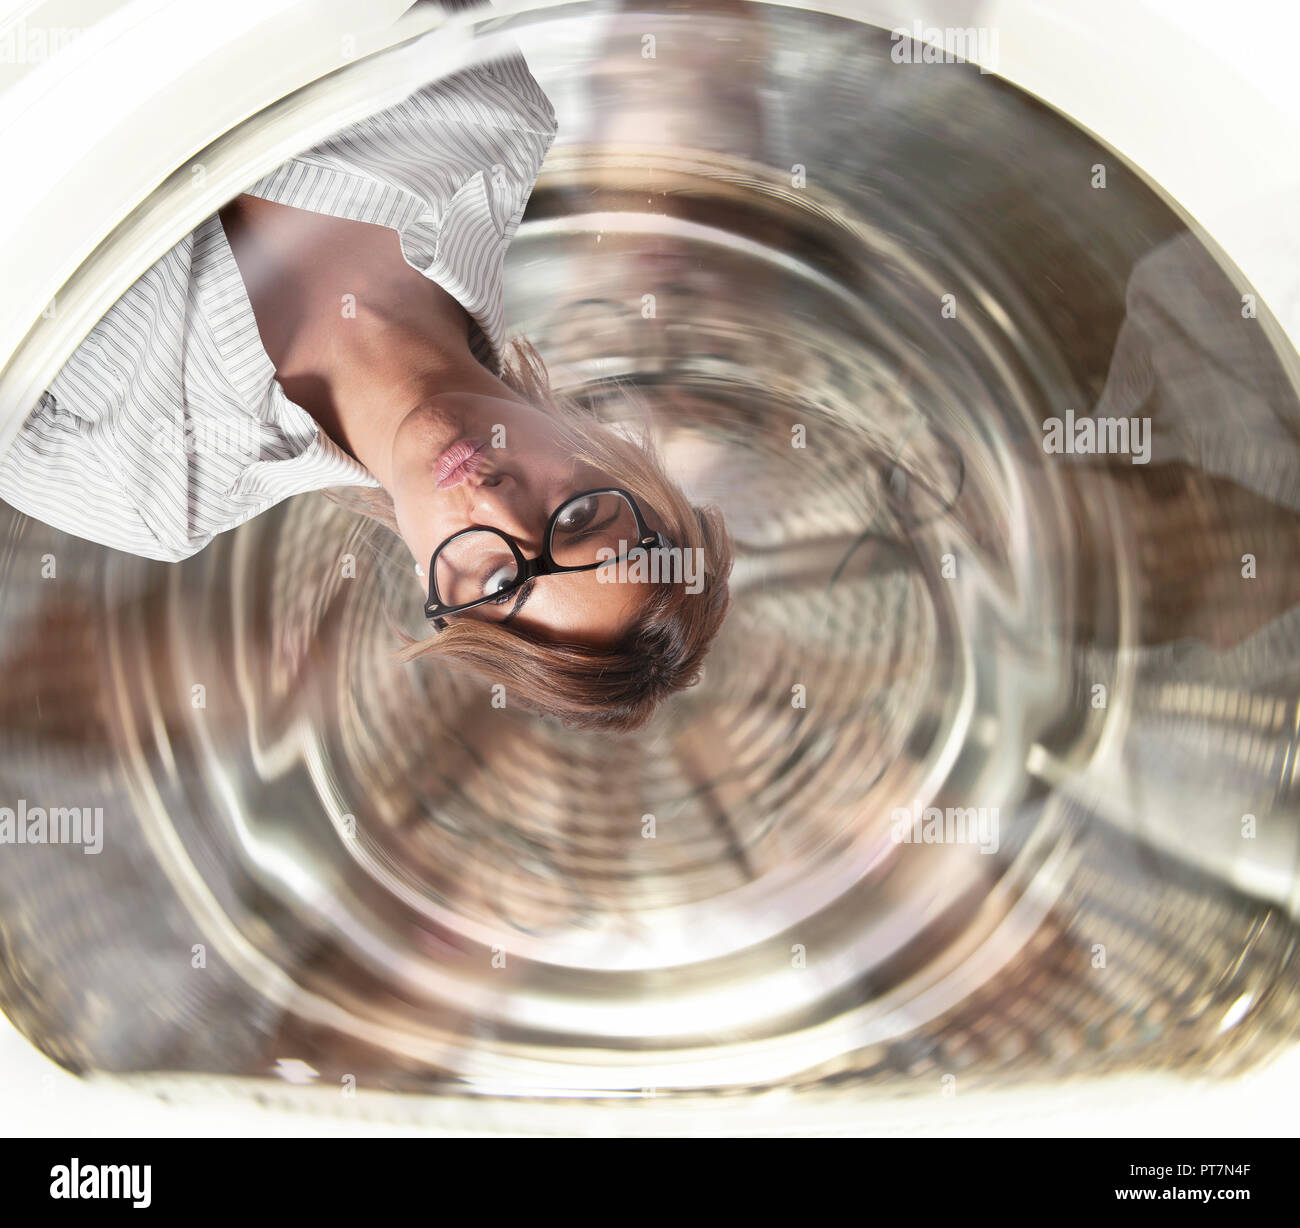 Confused businesswoman has dizziness inside a washing machine. Concept of stress and overwork Stock Photo